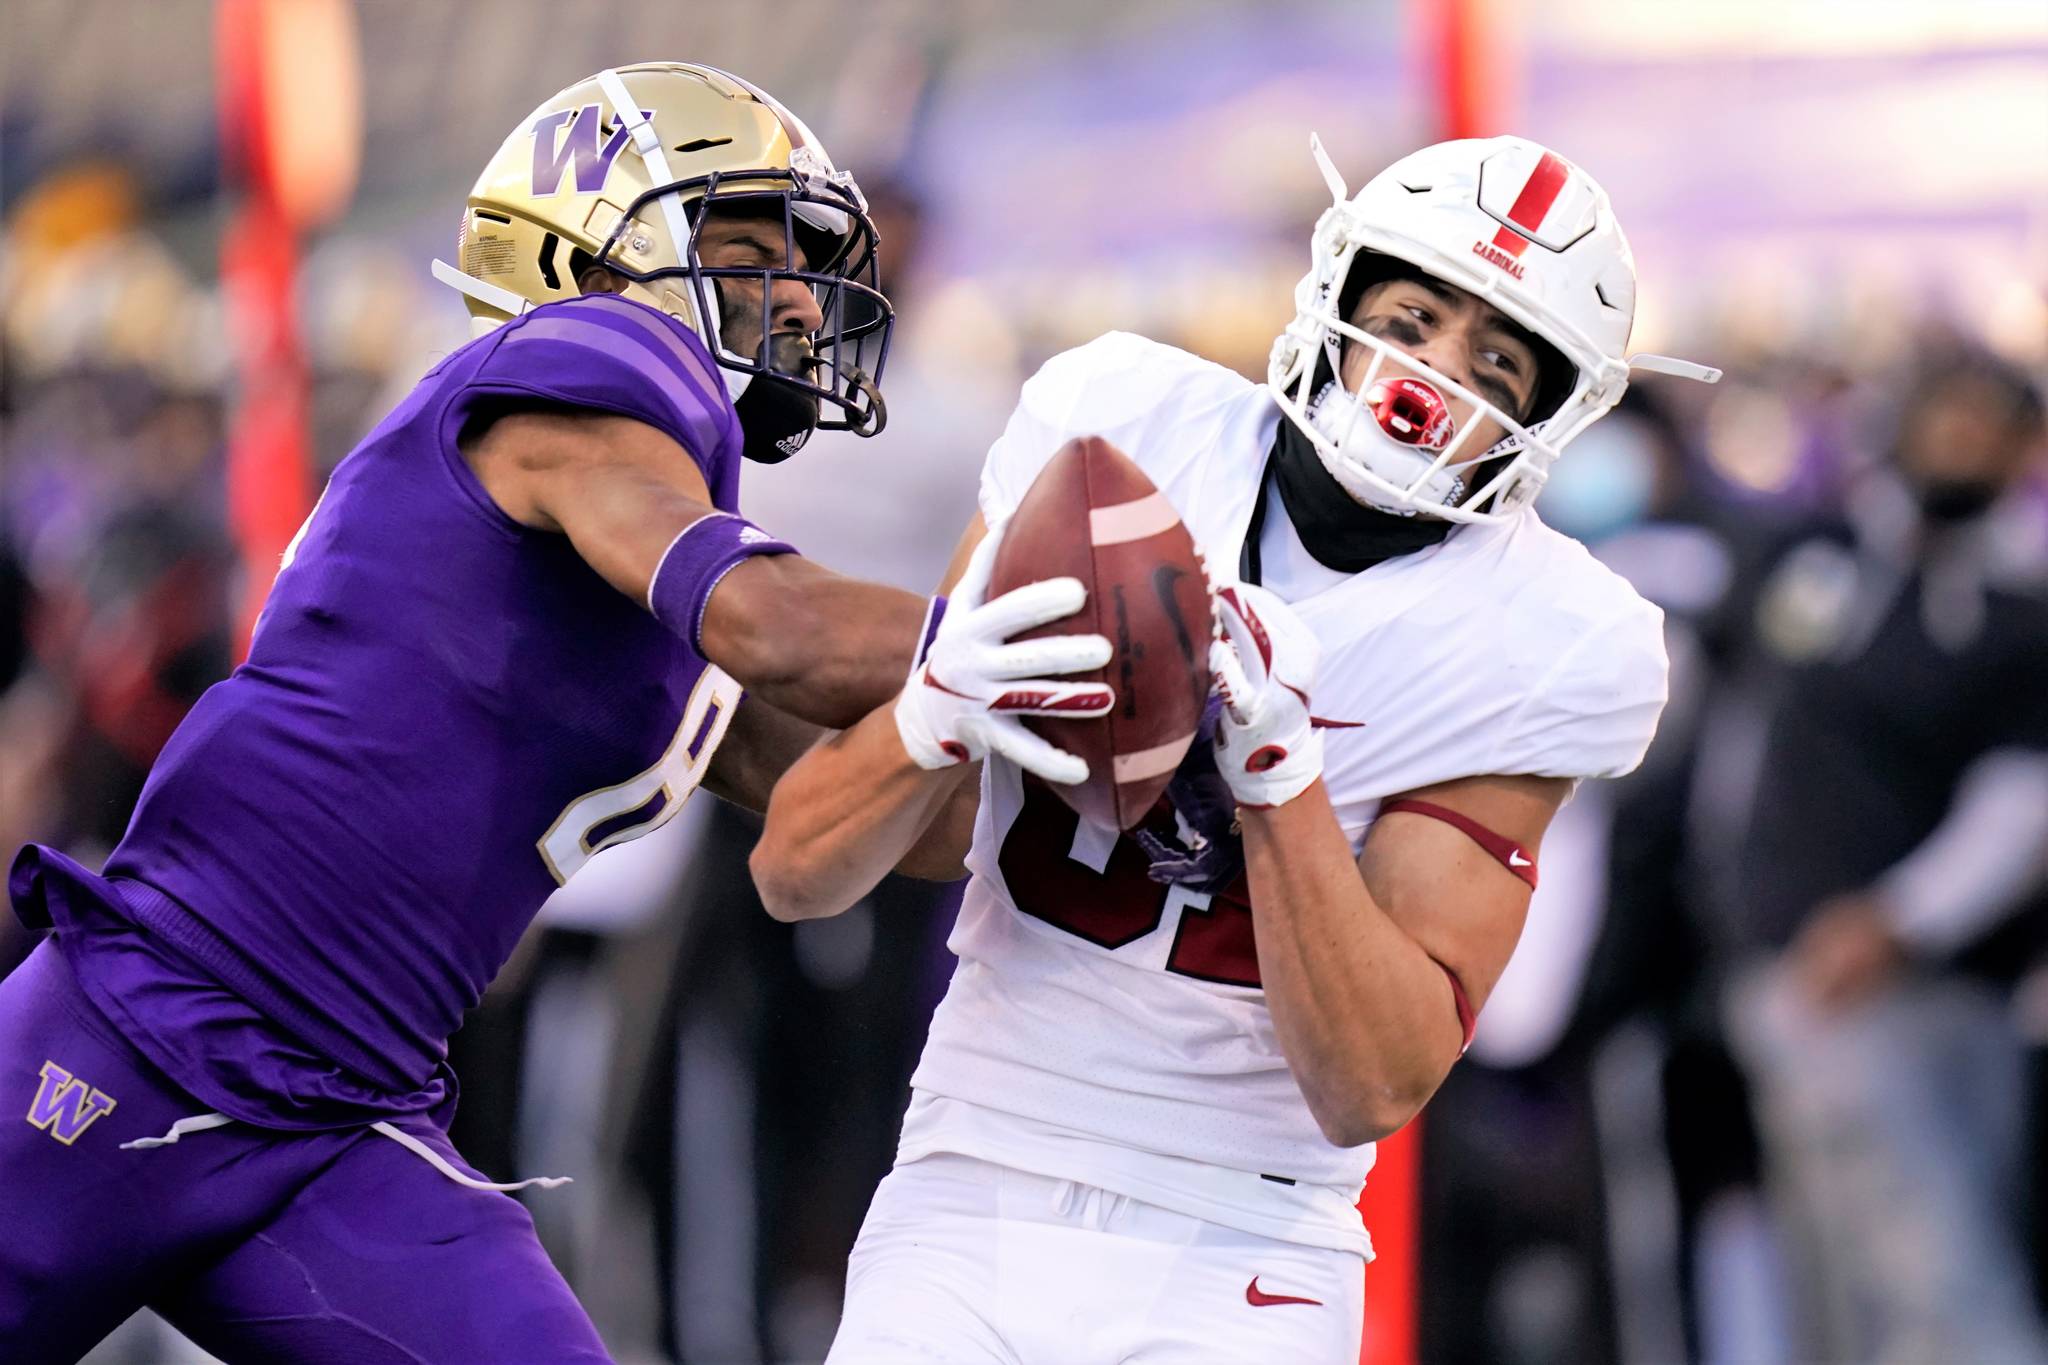 Stanford wide receiver Brycen Tremayne, right, catches a 33-yard pass as Washington defensive back Keith Taylor defends Saturday in Seattle. (AP Photo/Elaine Thompson)